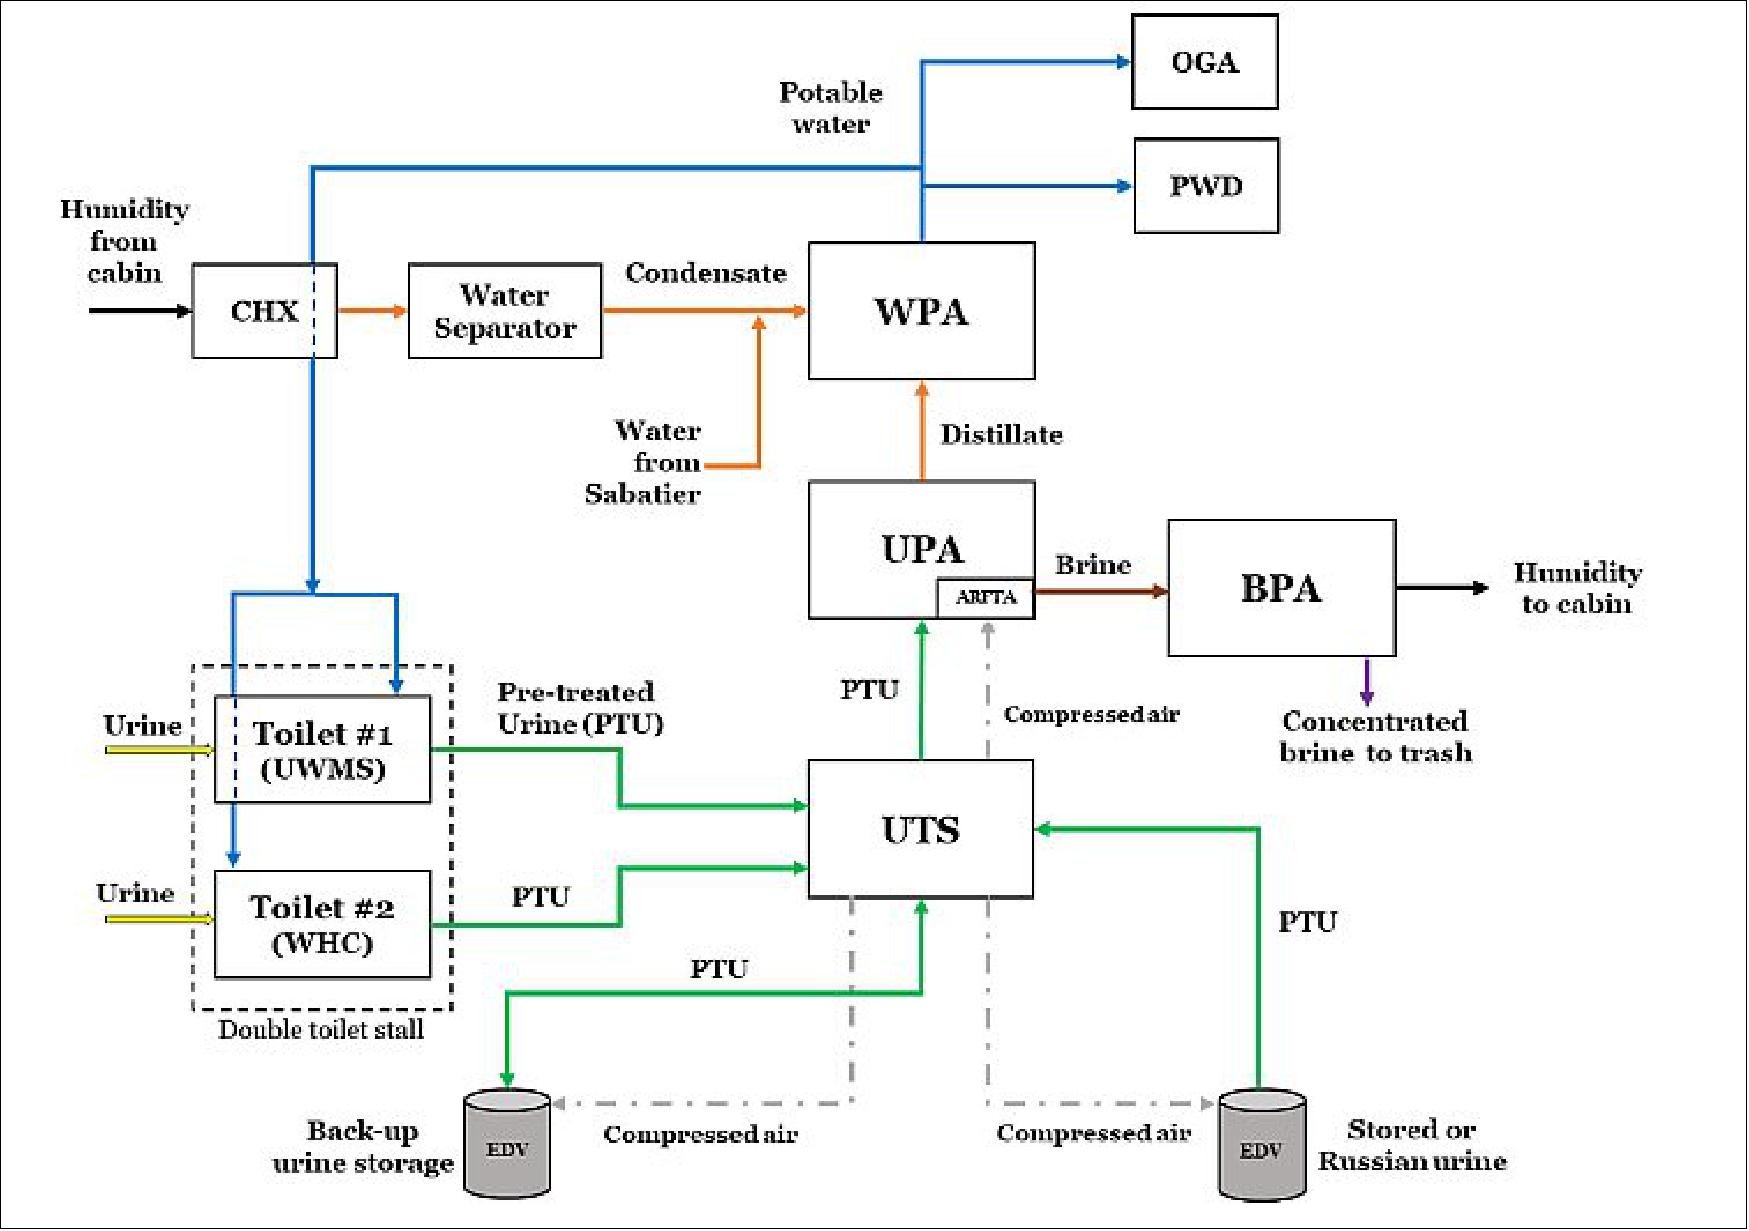 Figure 12: This diagram shows how the BPA fits into the water system (image credit: NASA)